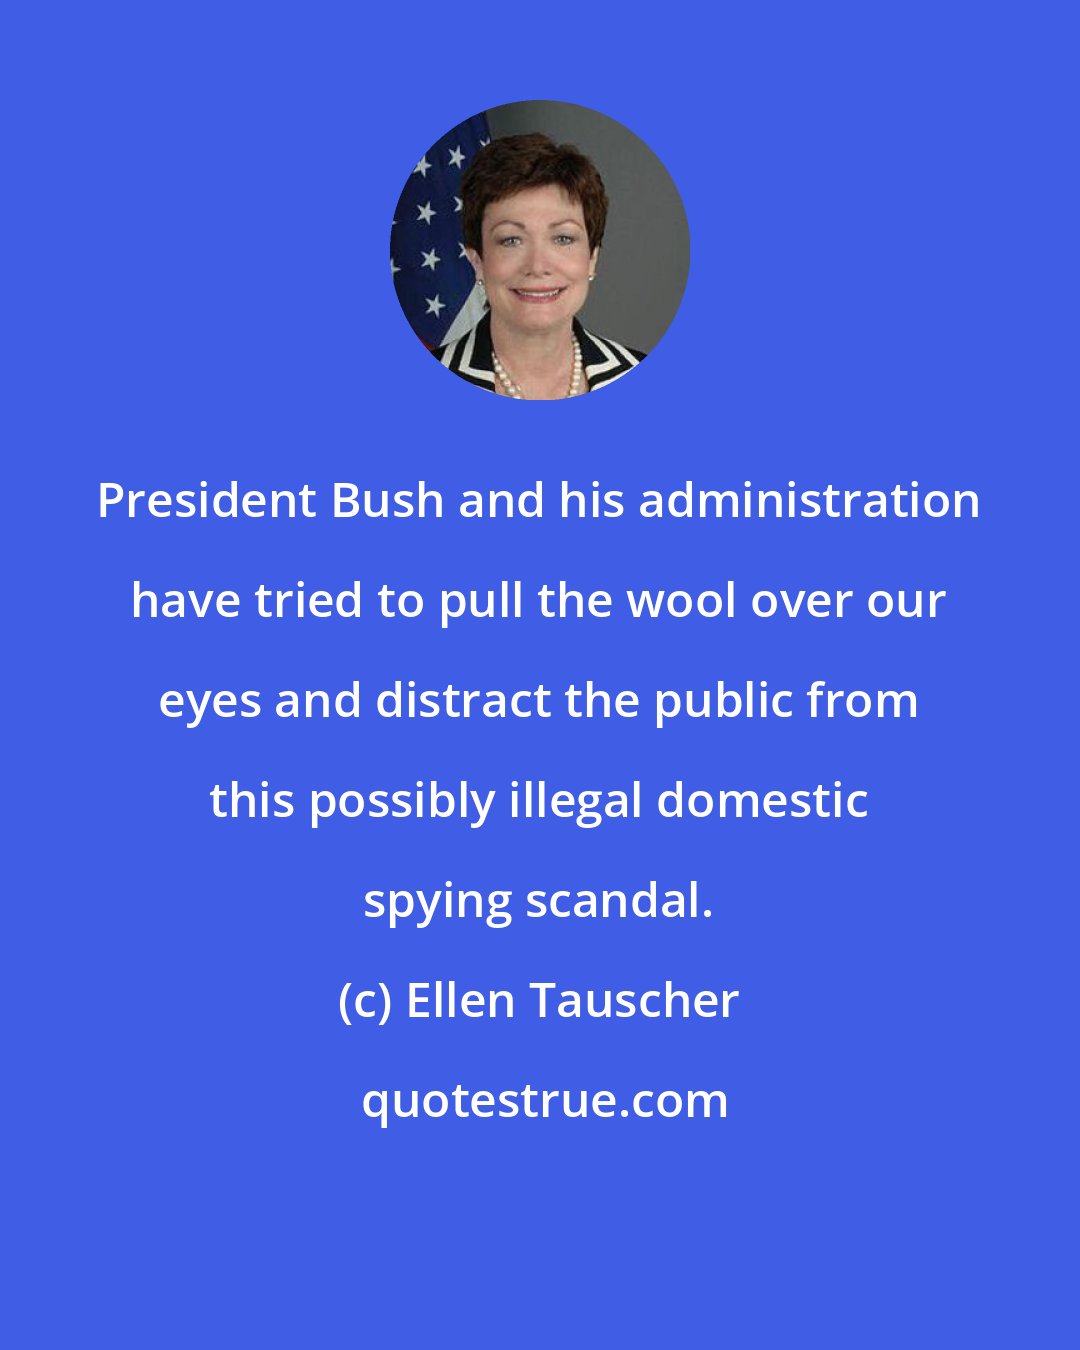 Ellen Tauscher: President Bush and his administration have tried to pull the wool over our eyes and distract the public from this possibly illegal domestic spying scandal.